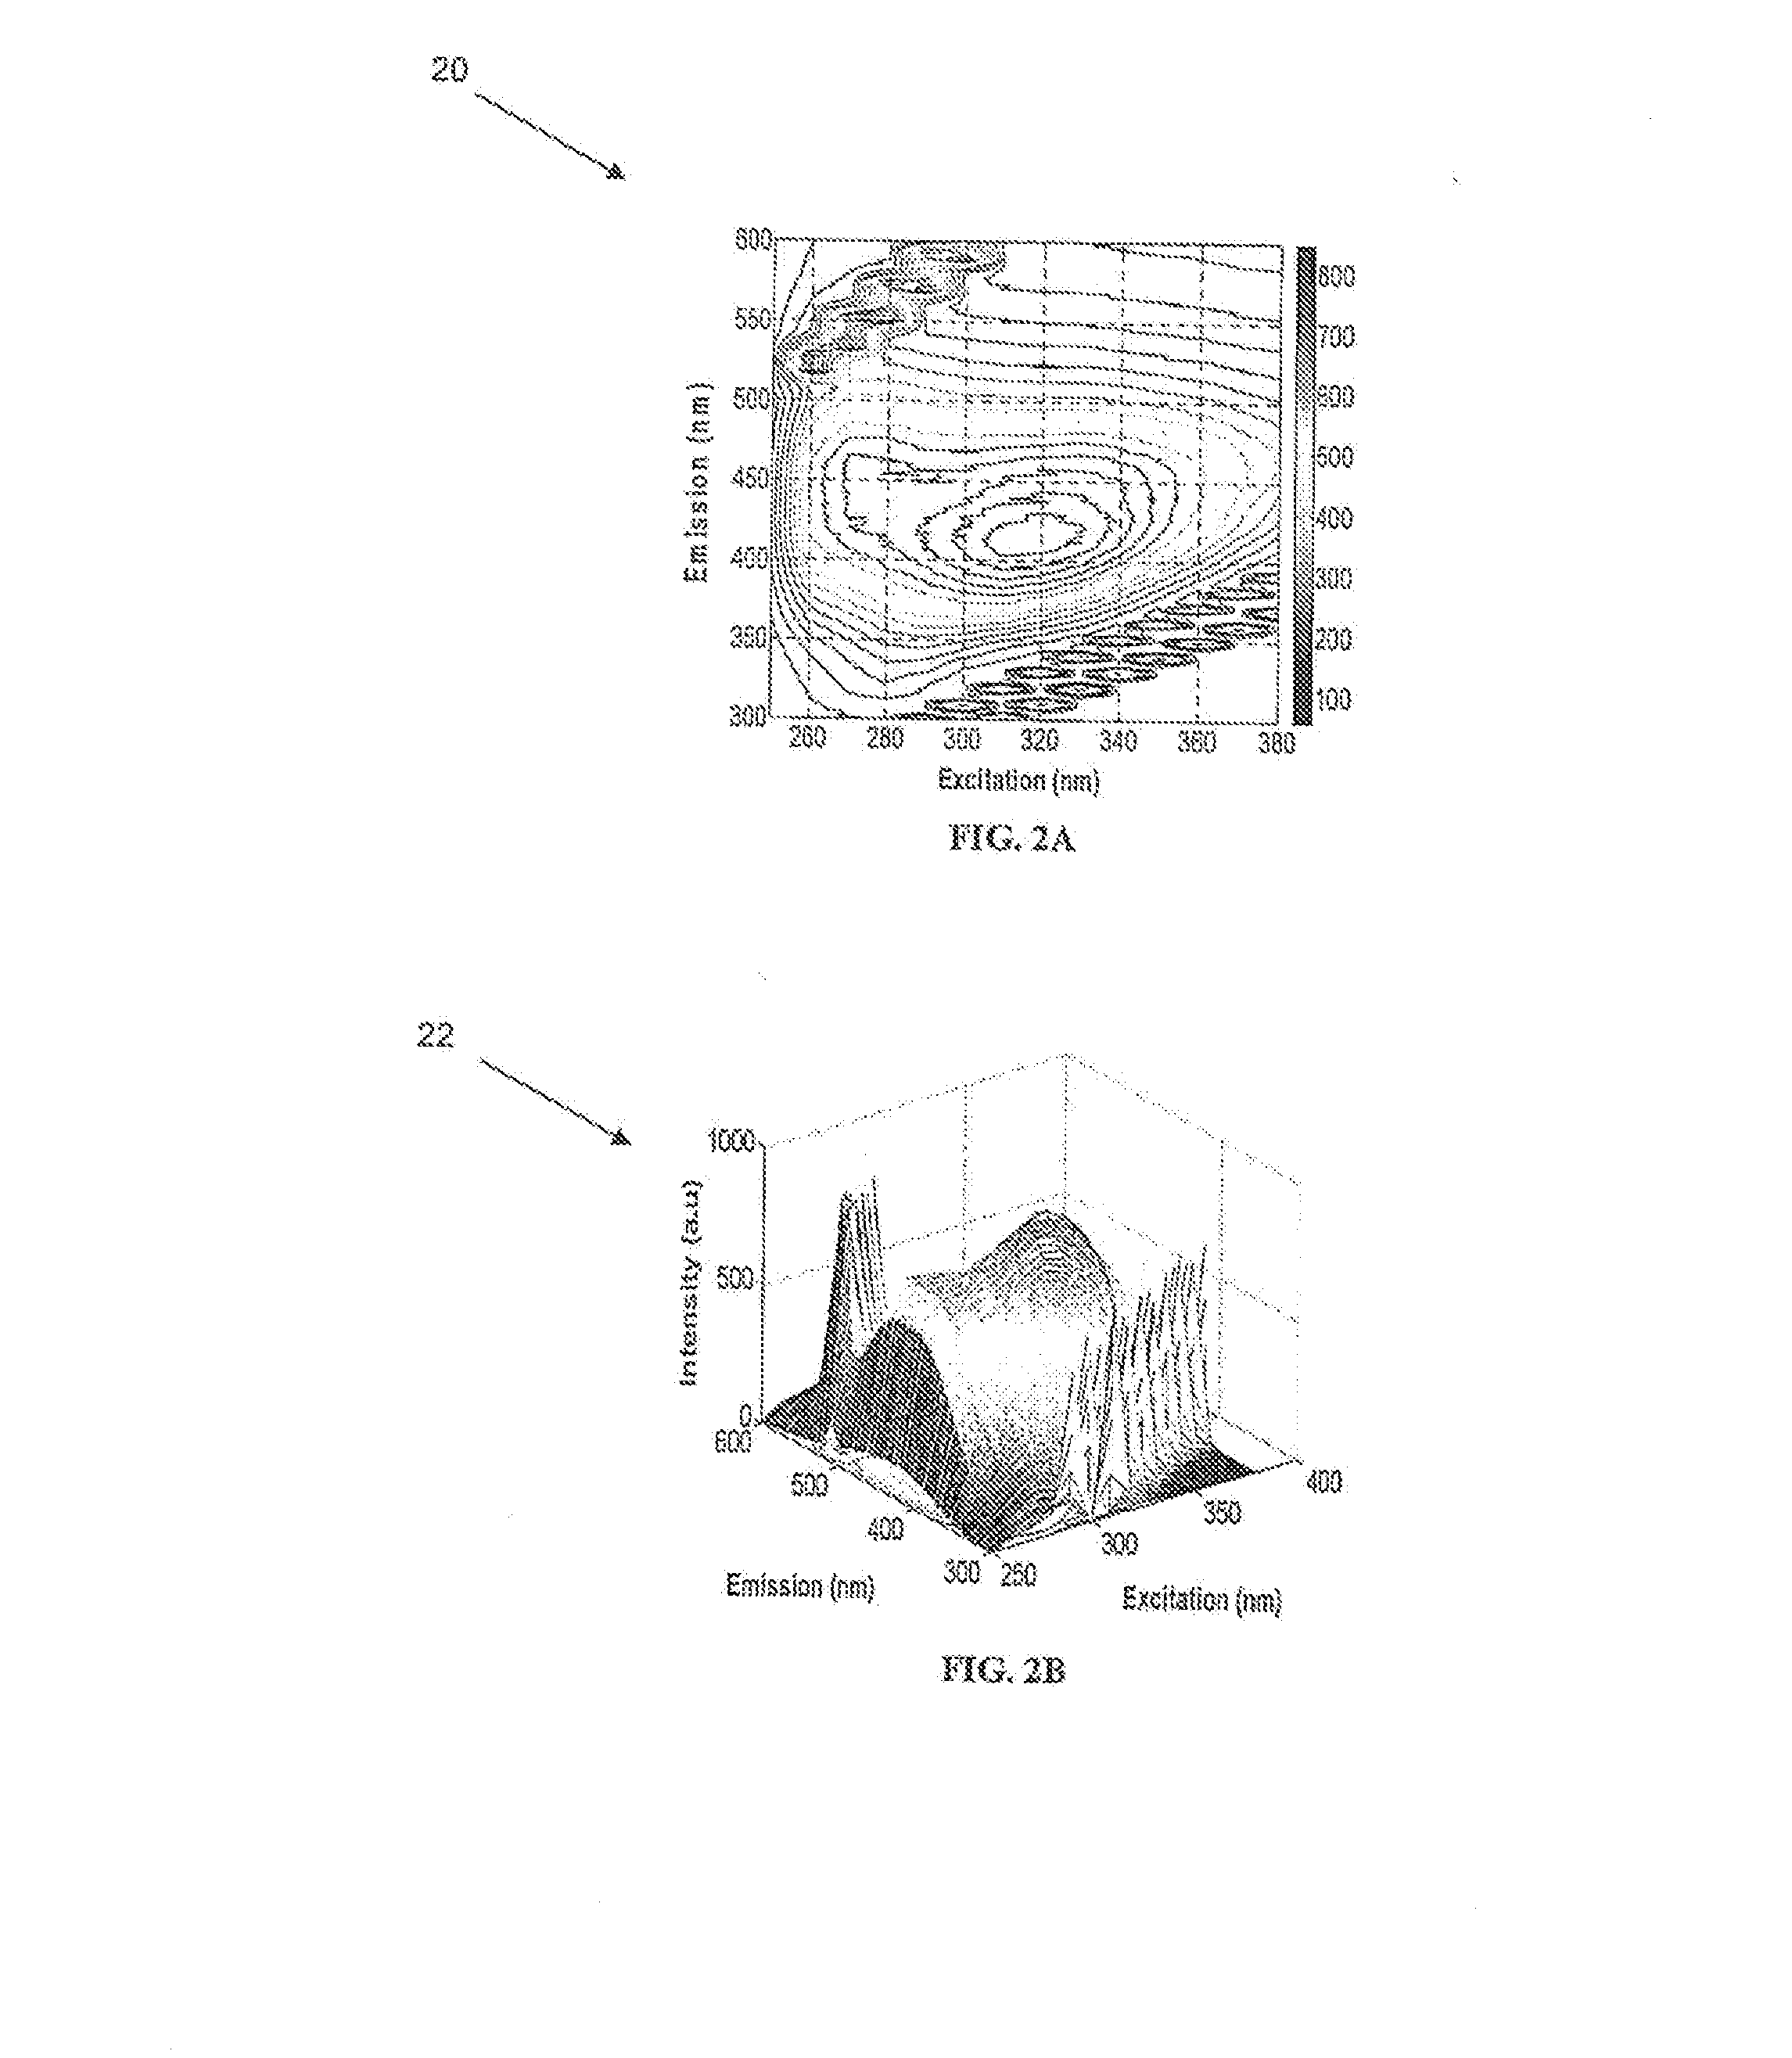 Method for fluorescence-based fouling forecasting and optimization in membrane filtration operations